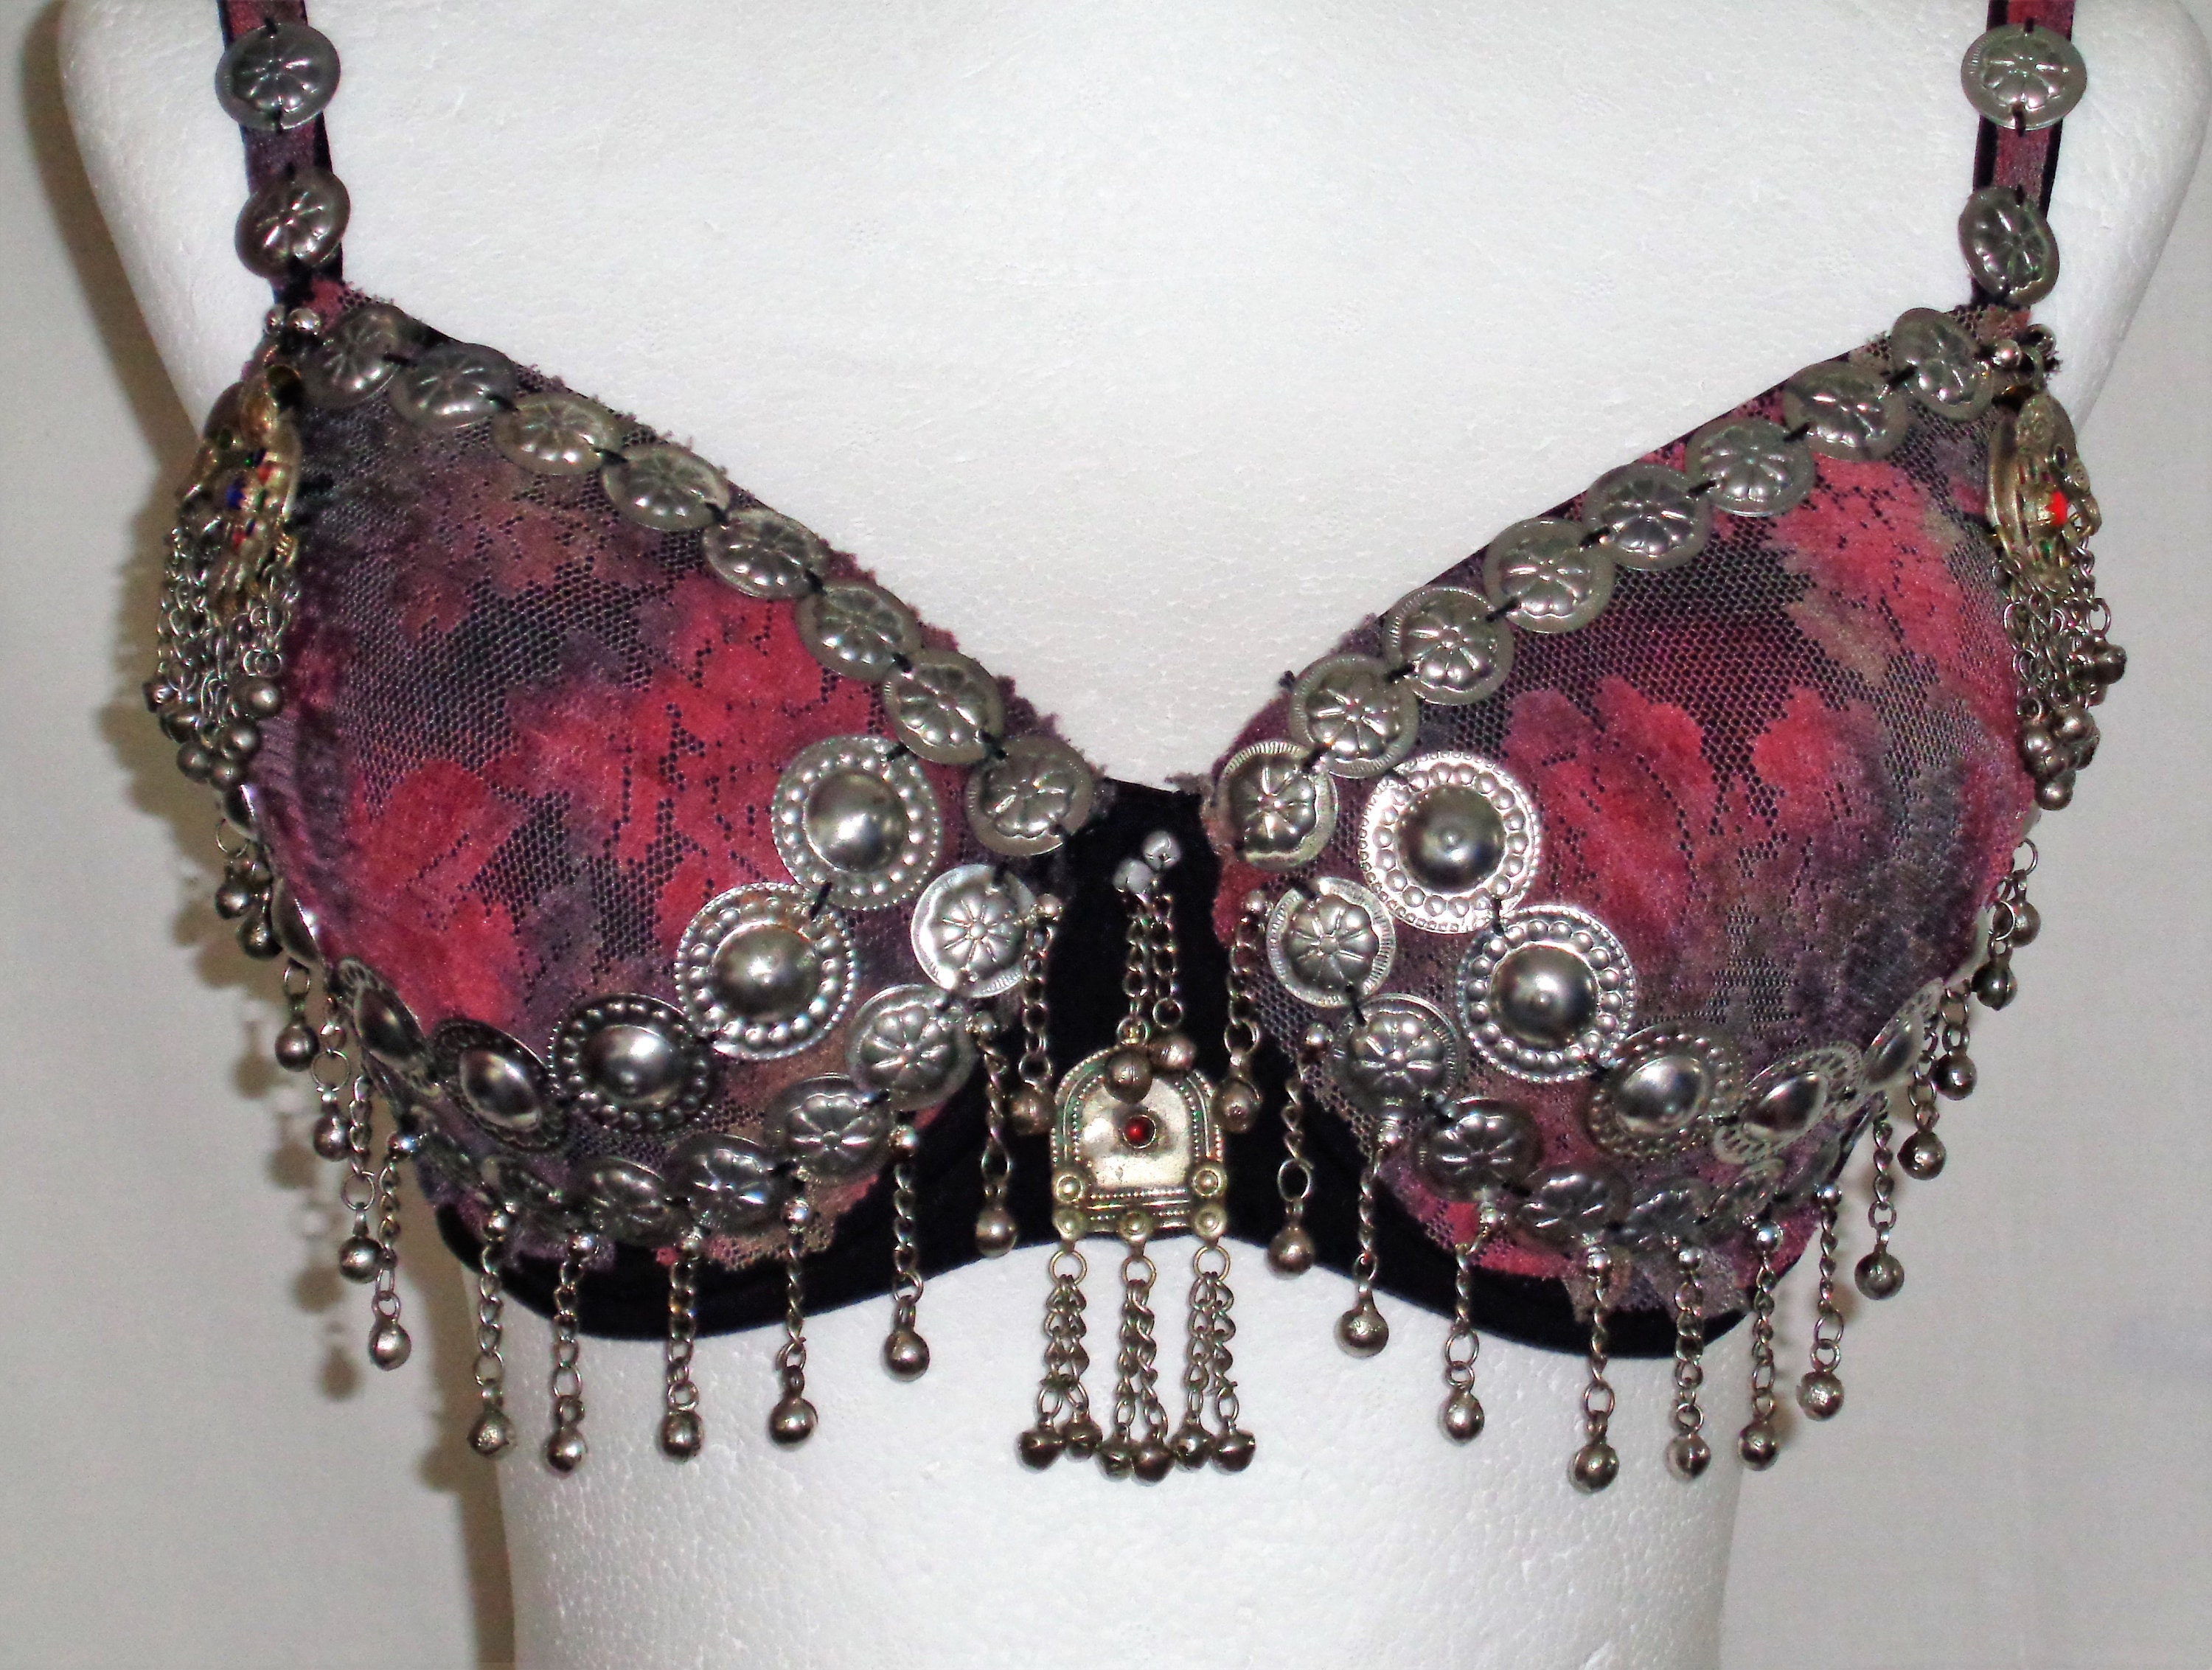 Tribal Fusion Bra, US Size 32 AA, Pink Tribal Fusion Bra With Bellychain  and Tribal Coins and Kuchi Buttons, Handmade,ooak -  New Zealand